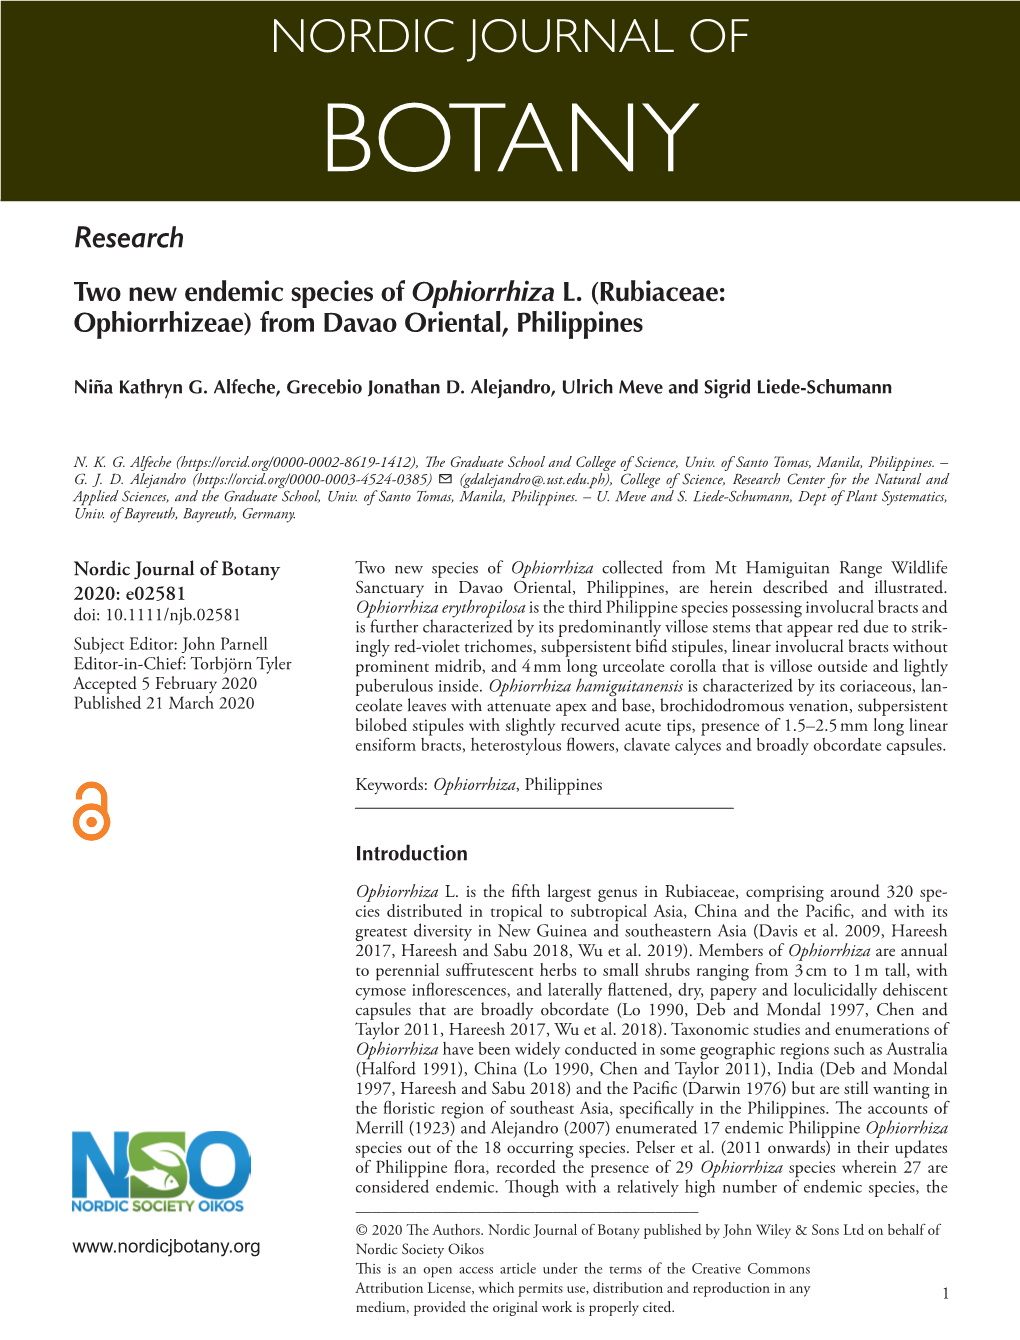 Two New Endemic Species of Ophiorrhiza L. (Rubiaceae: Ophiorrhizeae) from Davao Oriental, Philippines